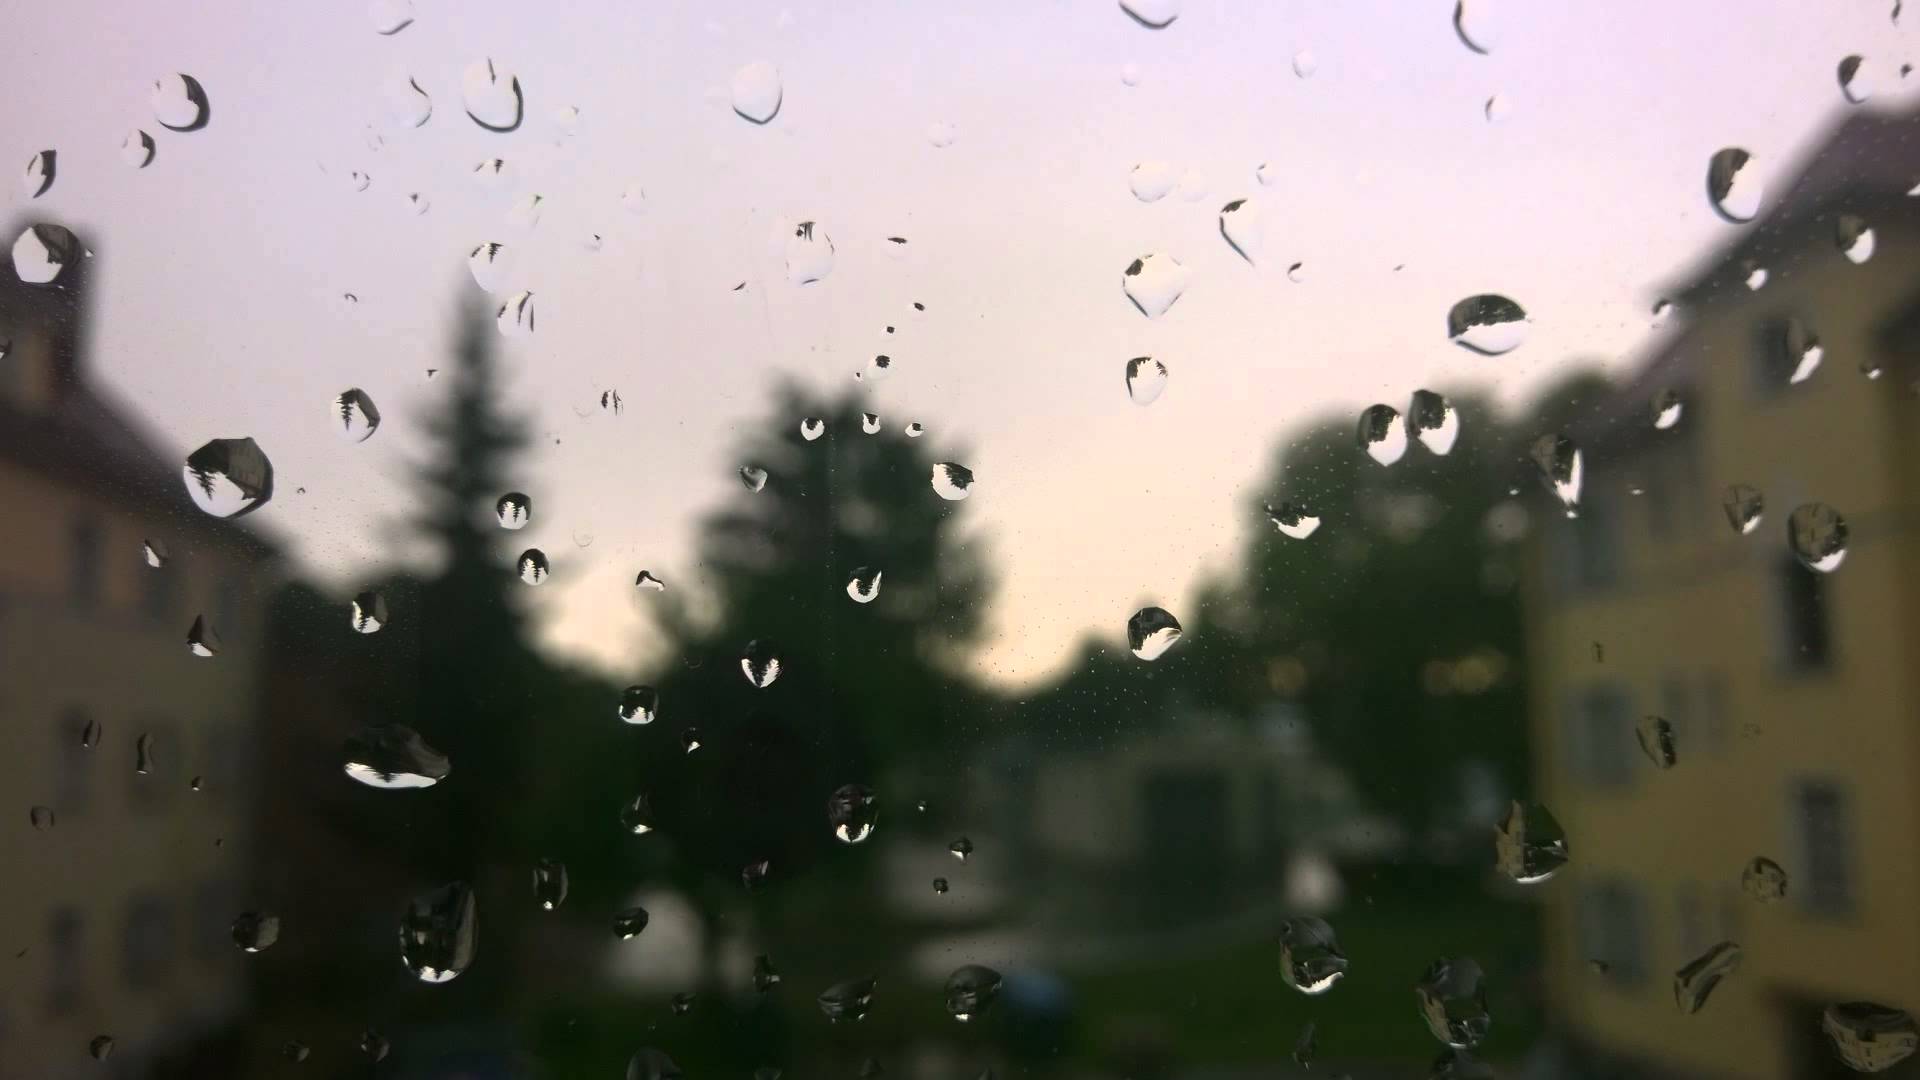 minutes of binaural rain background noise from patio